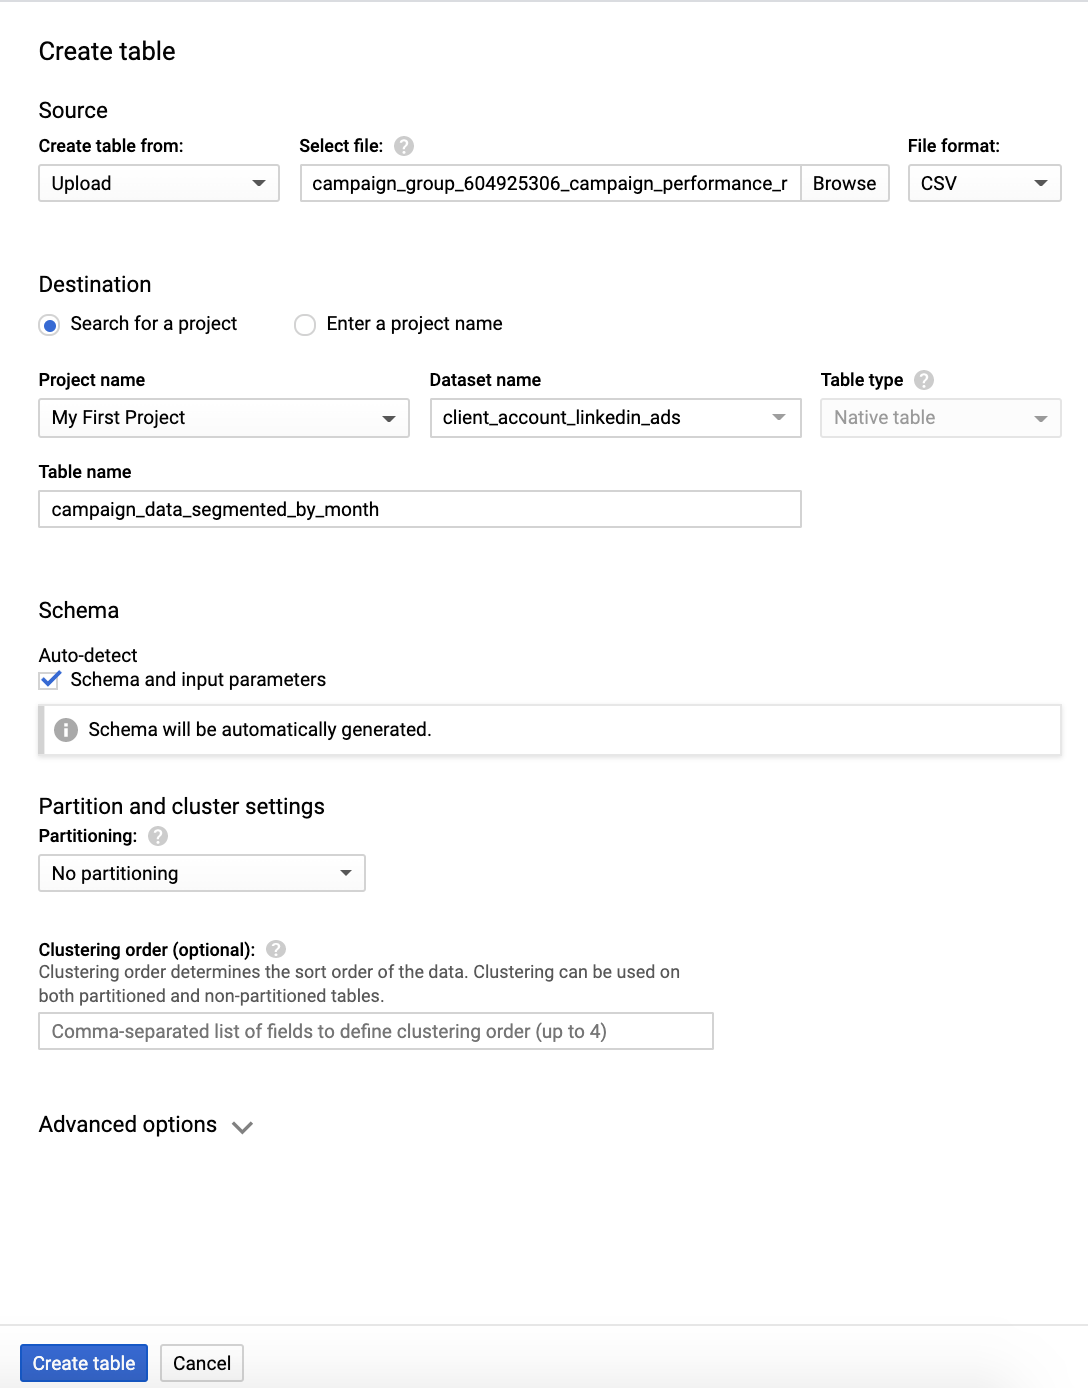 Google BigQuery form to create a table. It shows the inputs needed to create a data table for LinkedIn Ads data